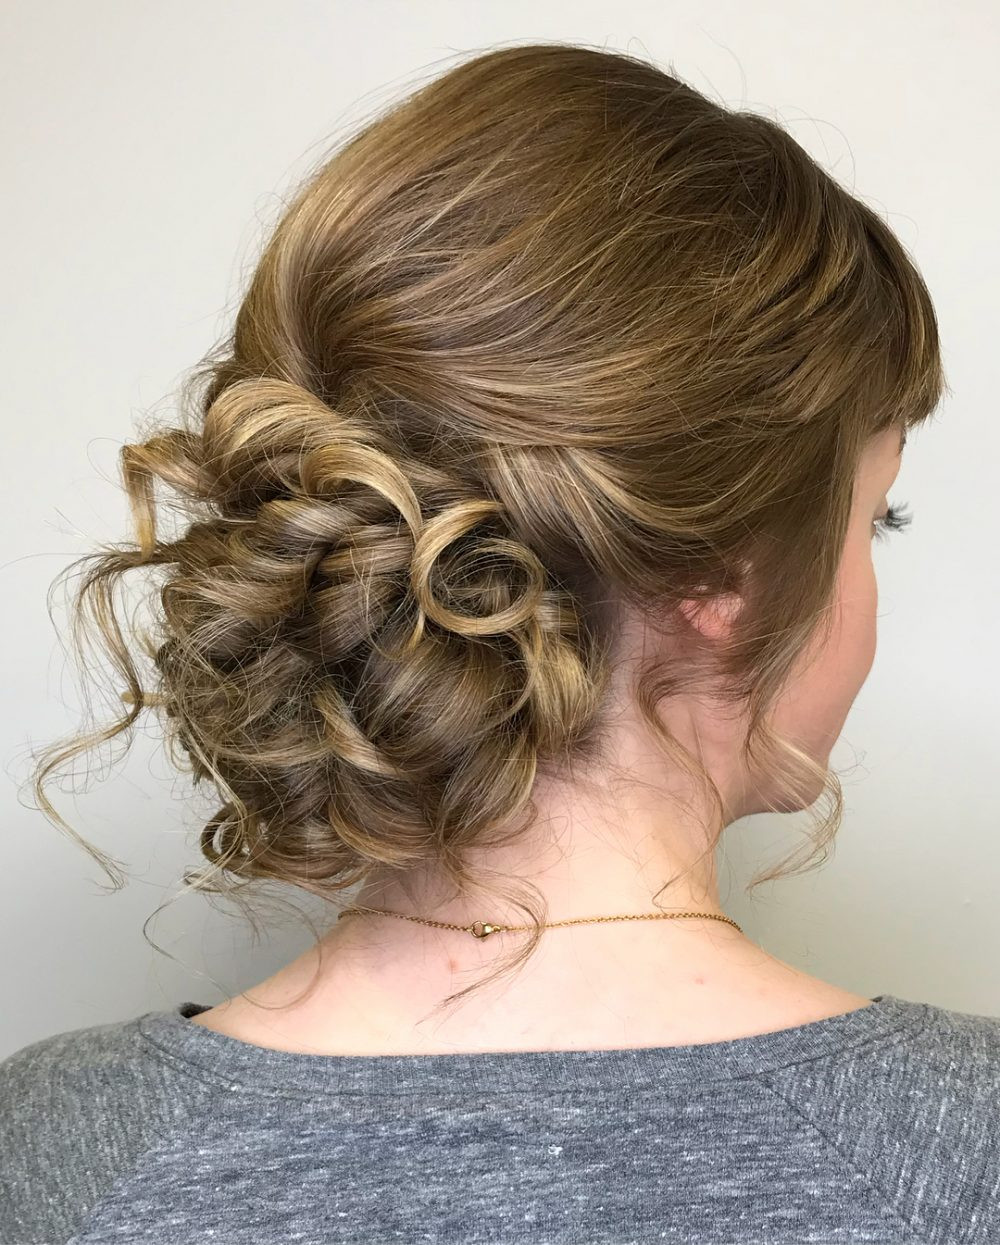 Pretty Hairstyles For Prom
 23 Cute Prom Hairstyles for 2020 Updos Braids Half Ups